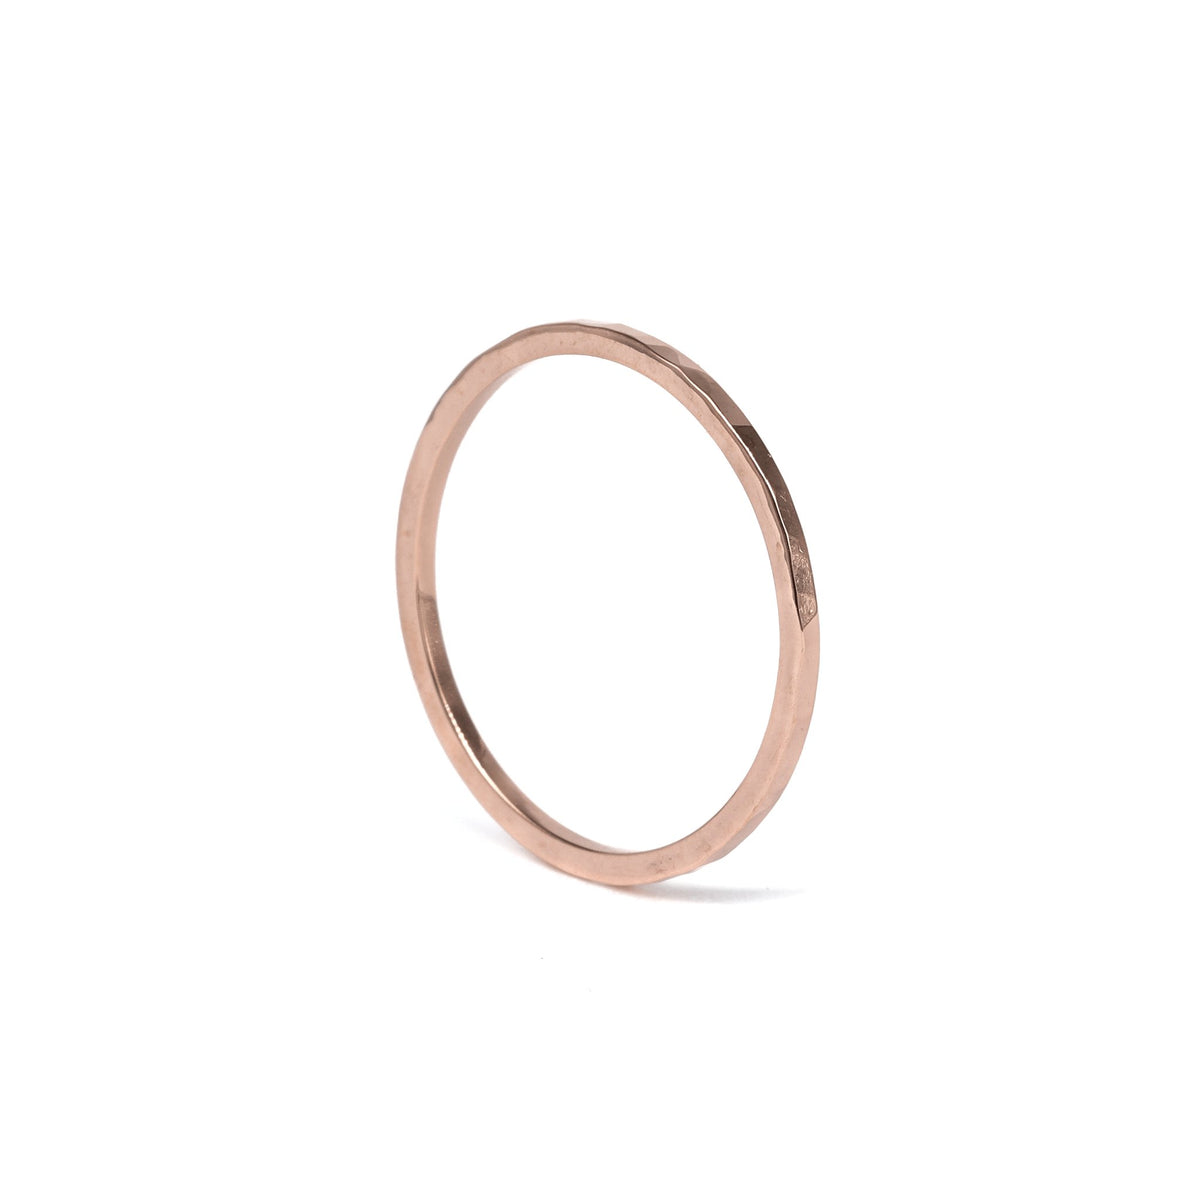  Hammered Stackable Ring in Rose Gold